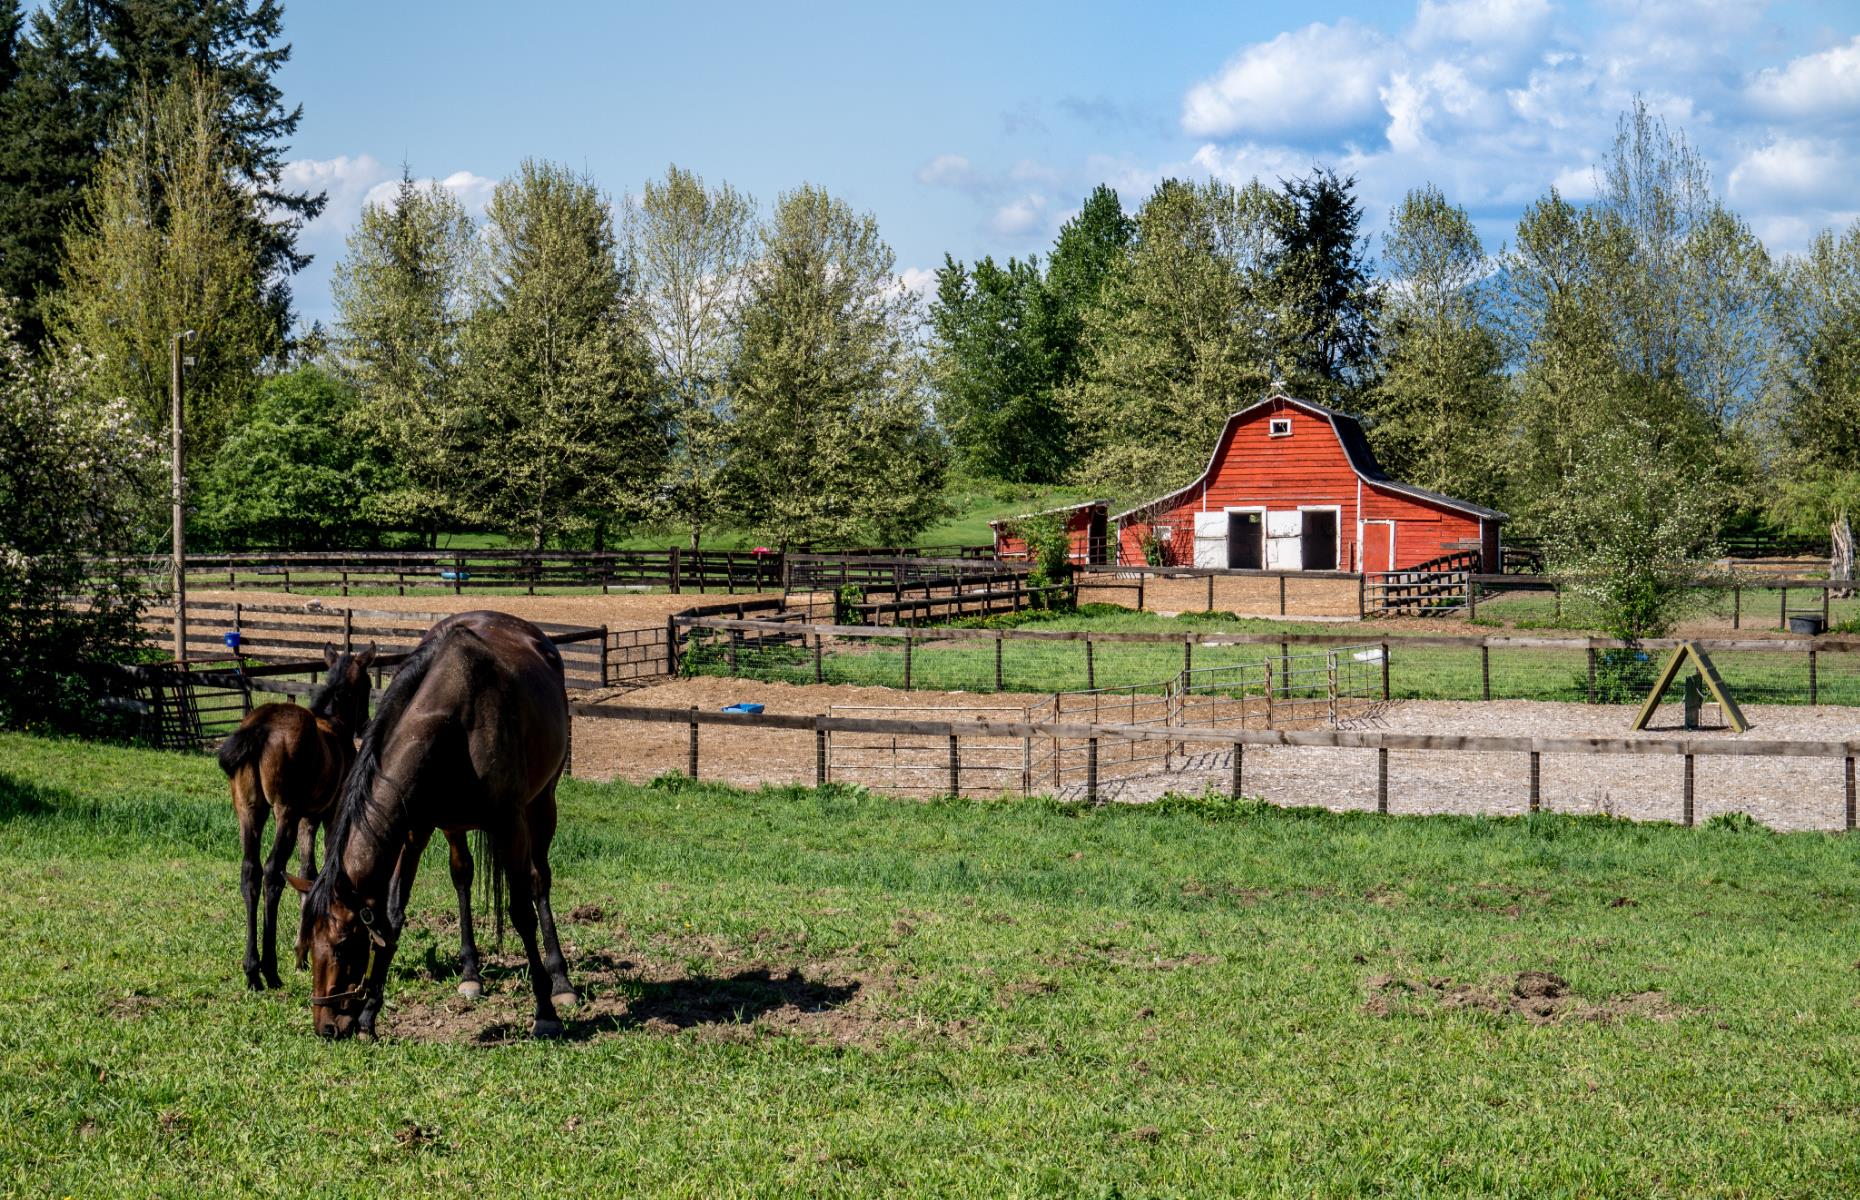 <p>The river valley makes for some of the most fertile farmland in Canada and many local food producers welcome visitors for either formal or self-guided tours. History lovers can also stop at the <a href="https://www.pc.gc.ca/en/lhn-nhs/bc/langley">Fort Langley National Historic Site</a>, an interpretive centre that served as a working Hudson’s Bay Company fur trading post 150 years ago.</p>